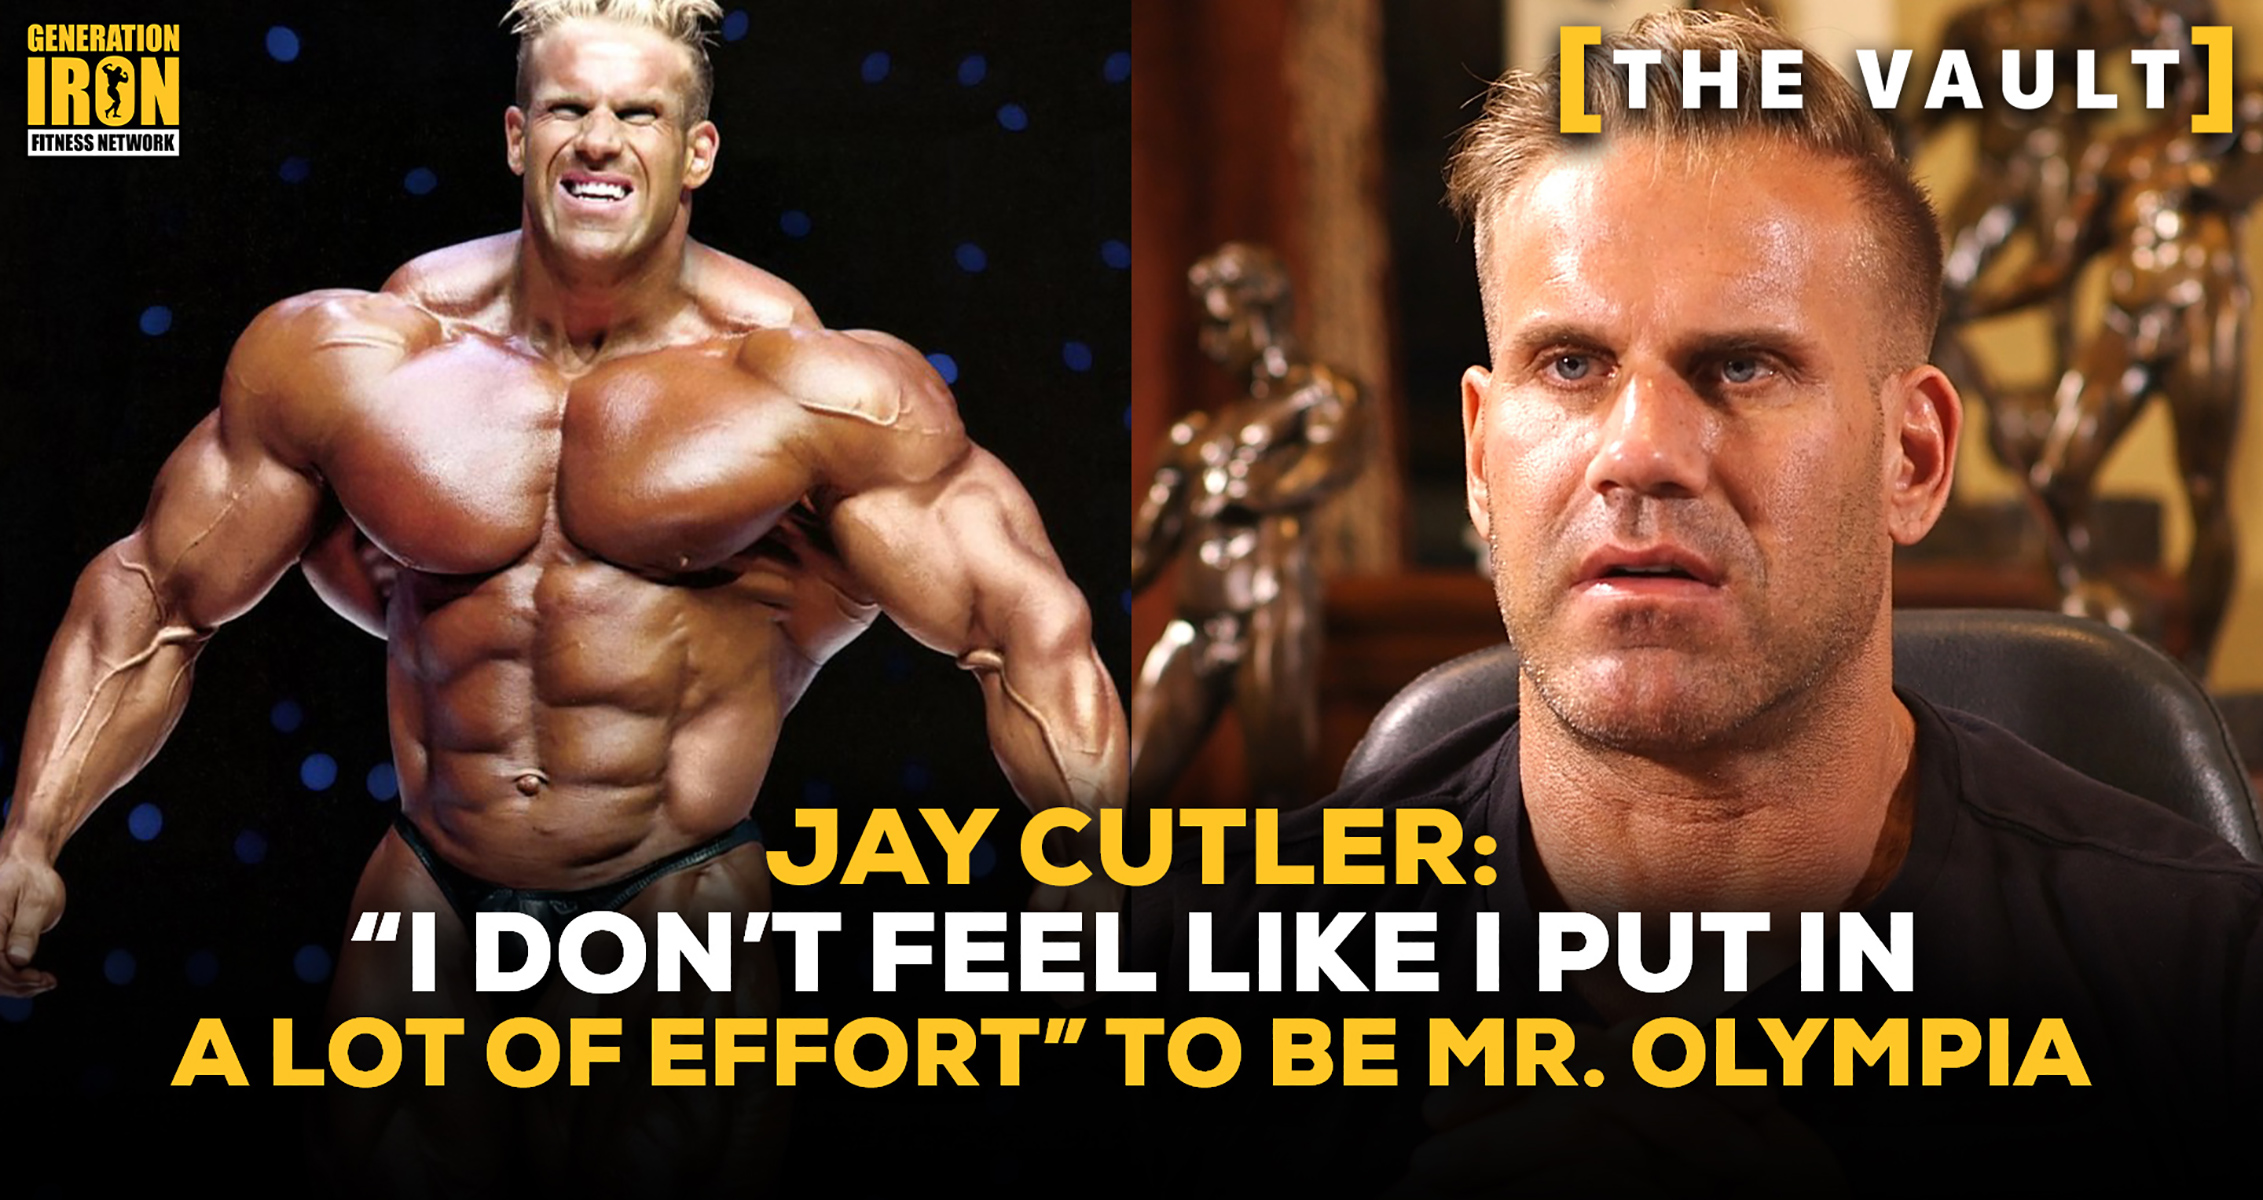 Jay Cutler: “I Don’t Feel Like I Put In A Lot Of Effort” To Be Mr. Olympia | MuscleChemistry Media